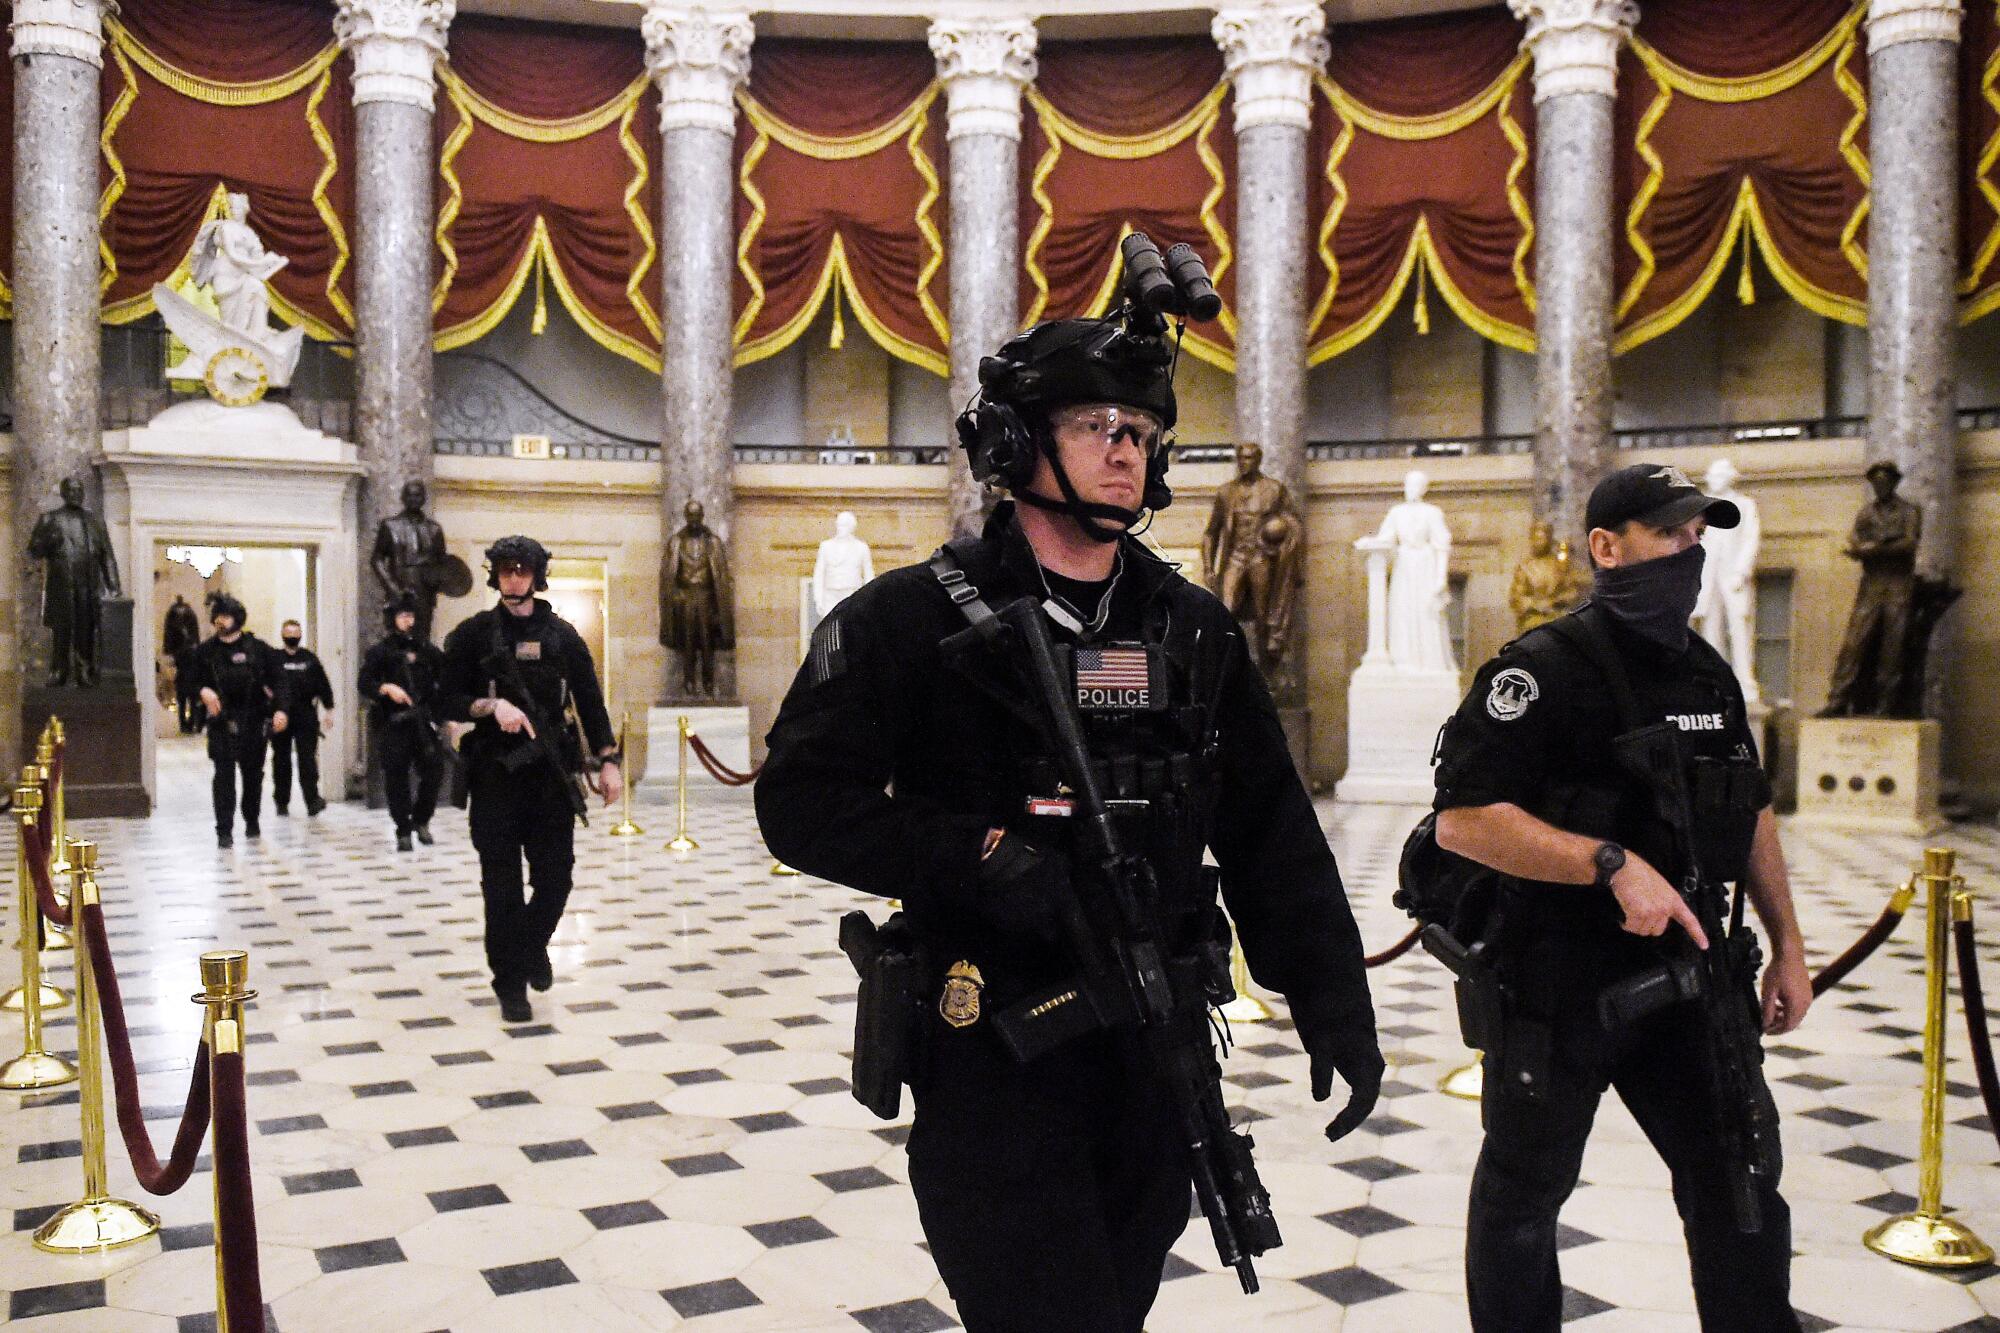 Law enforcement officers patrol the Statuary Hall of the Capitol.